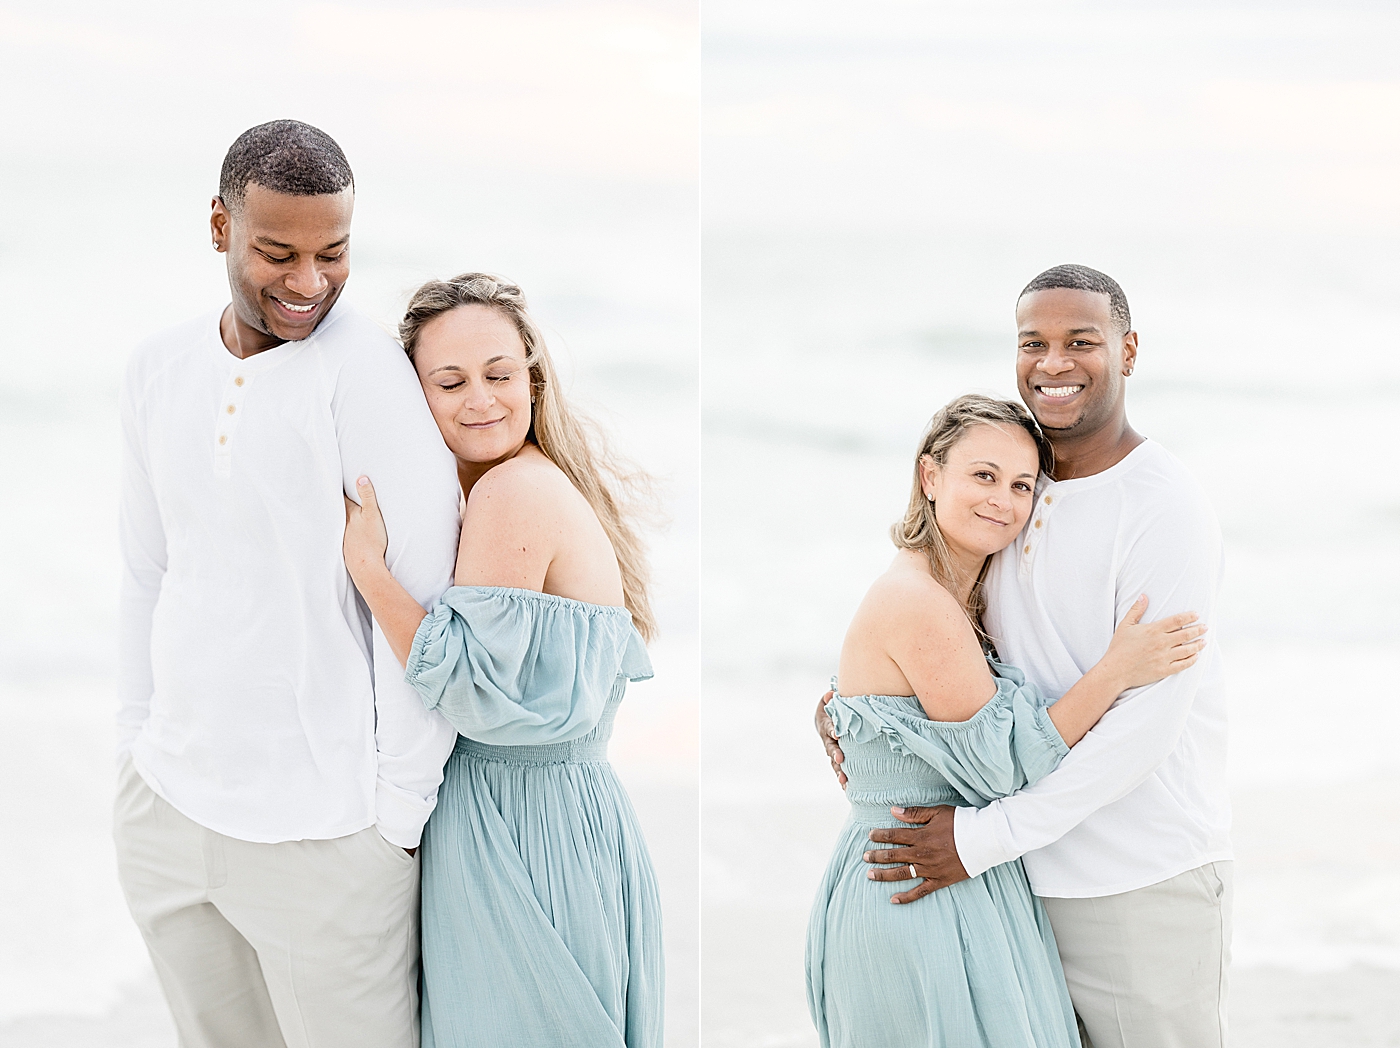 Sweet moments between Mom and Dad during beach photoshoot. Photo by Brittany Elise Photography.